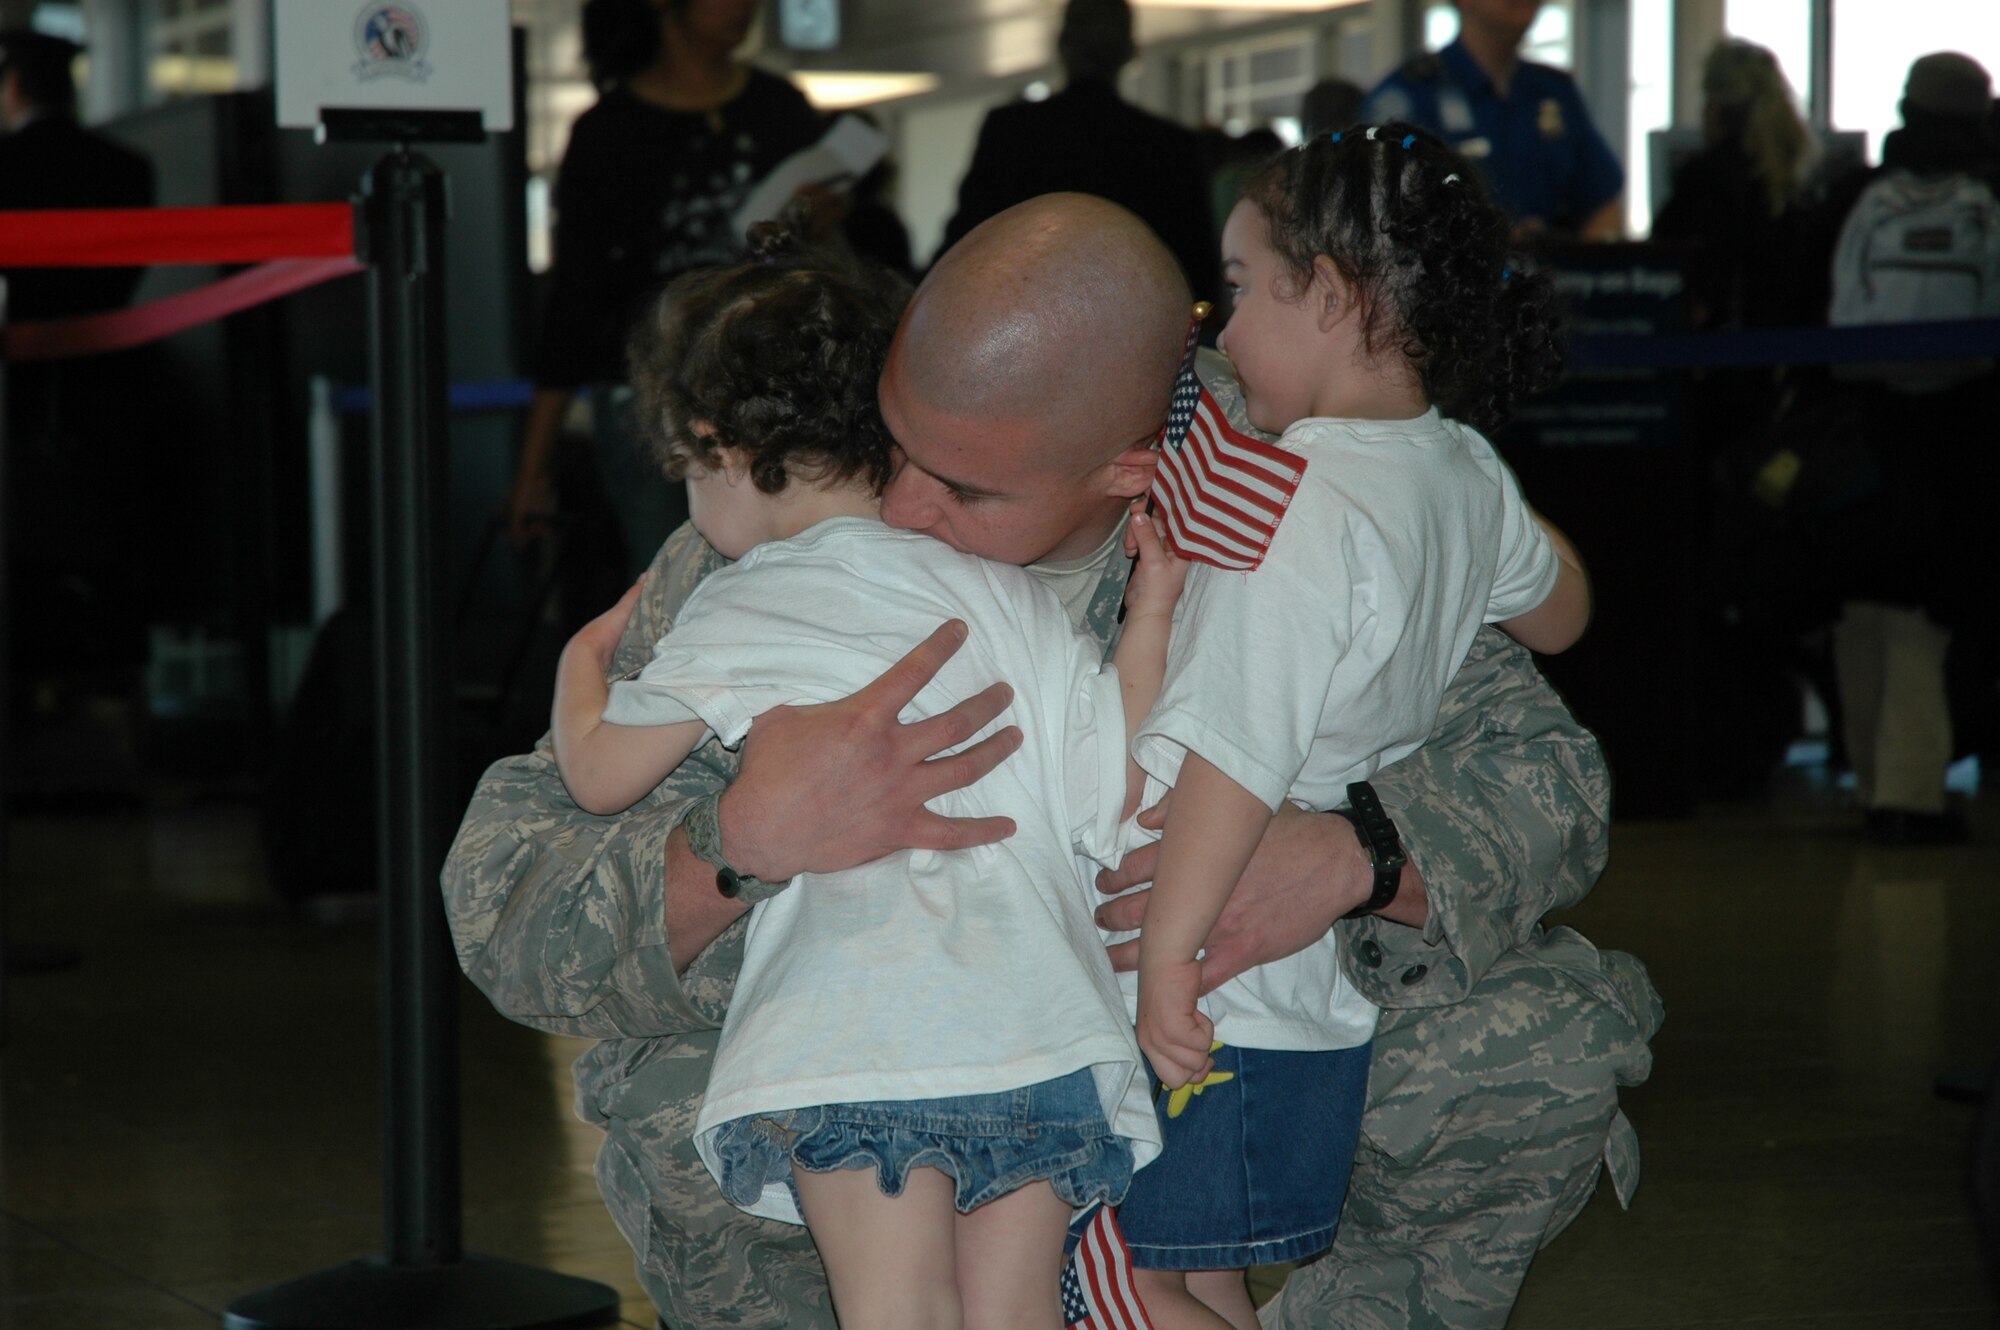 Staff Sgt. Francisco Alcocer, 944th Security Forces Squadron member, kisses his children Jan. 5 after returning from a six-month deployment to Kirkuk Regional Air Base, Iraq. Sergeant Alcocer and 36 other security forces members were welcomed home at Phoenix Sky Harbor International Airport following their activation in support of Operation Iraqi Freedom. (U.S. Air Force photo/Tech. Sgt. Susan Stout)